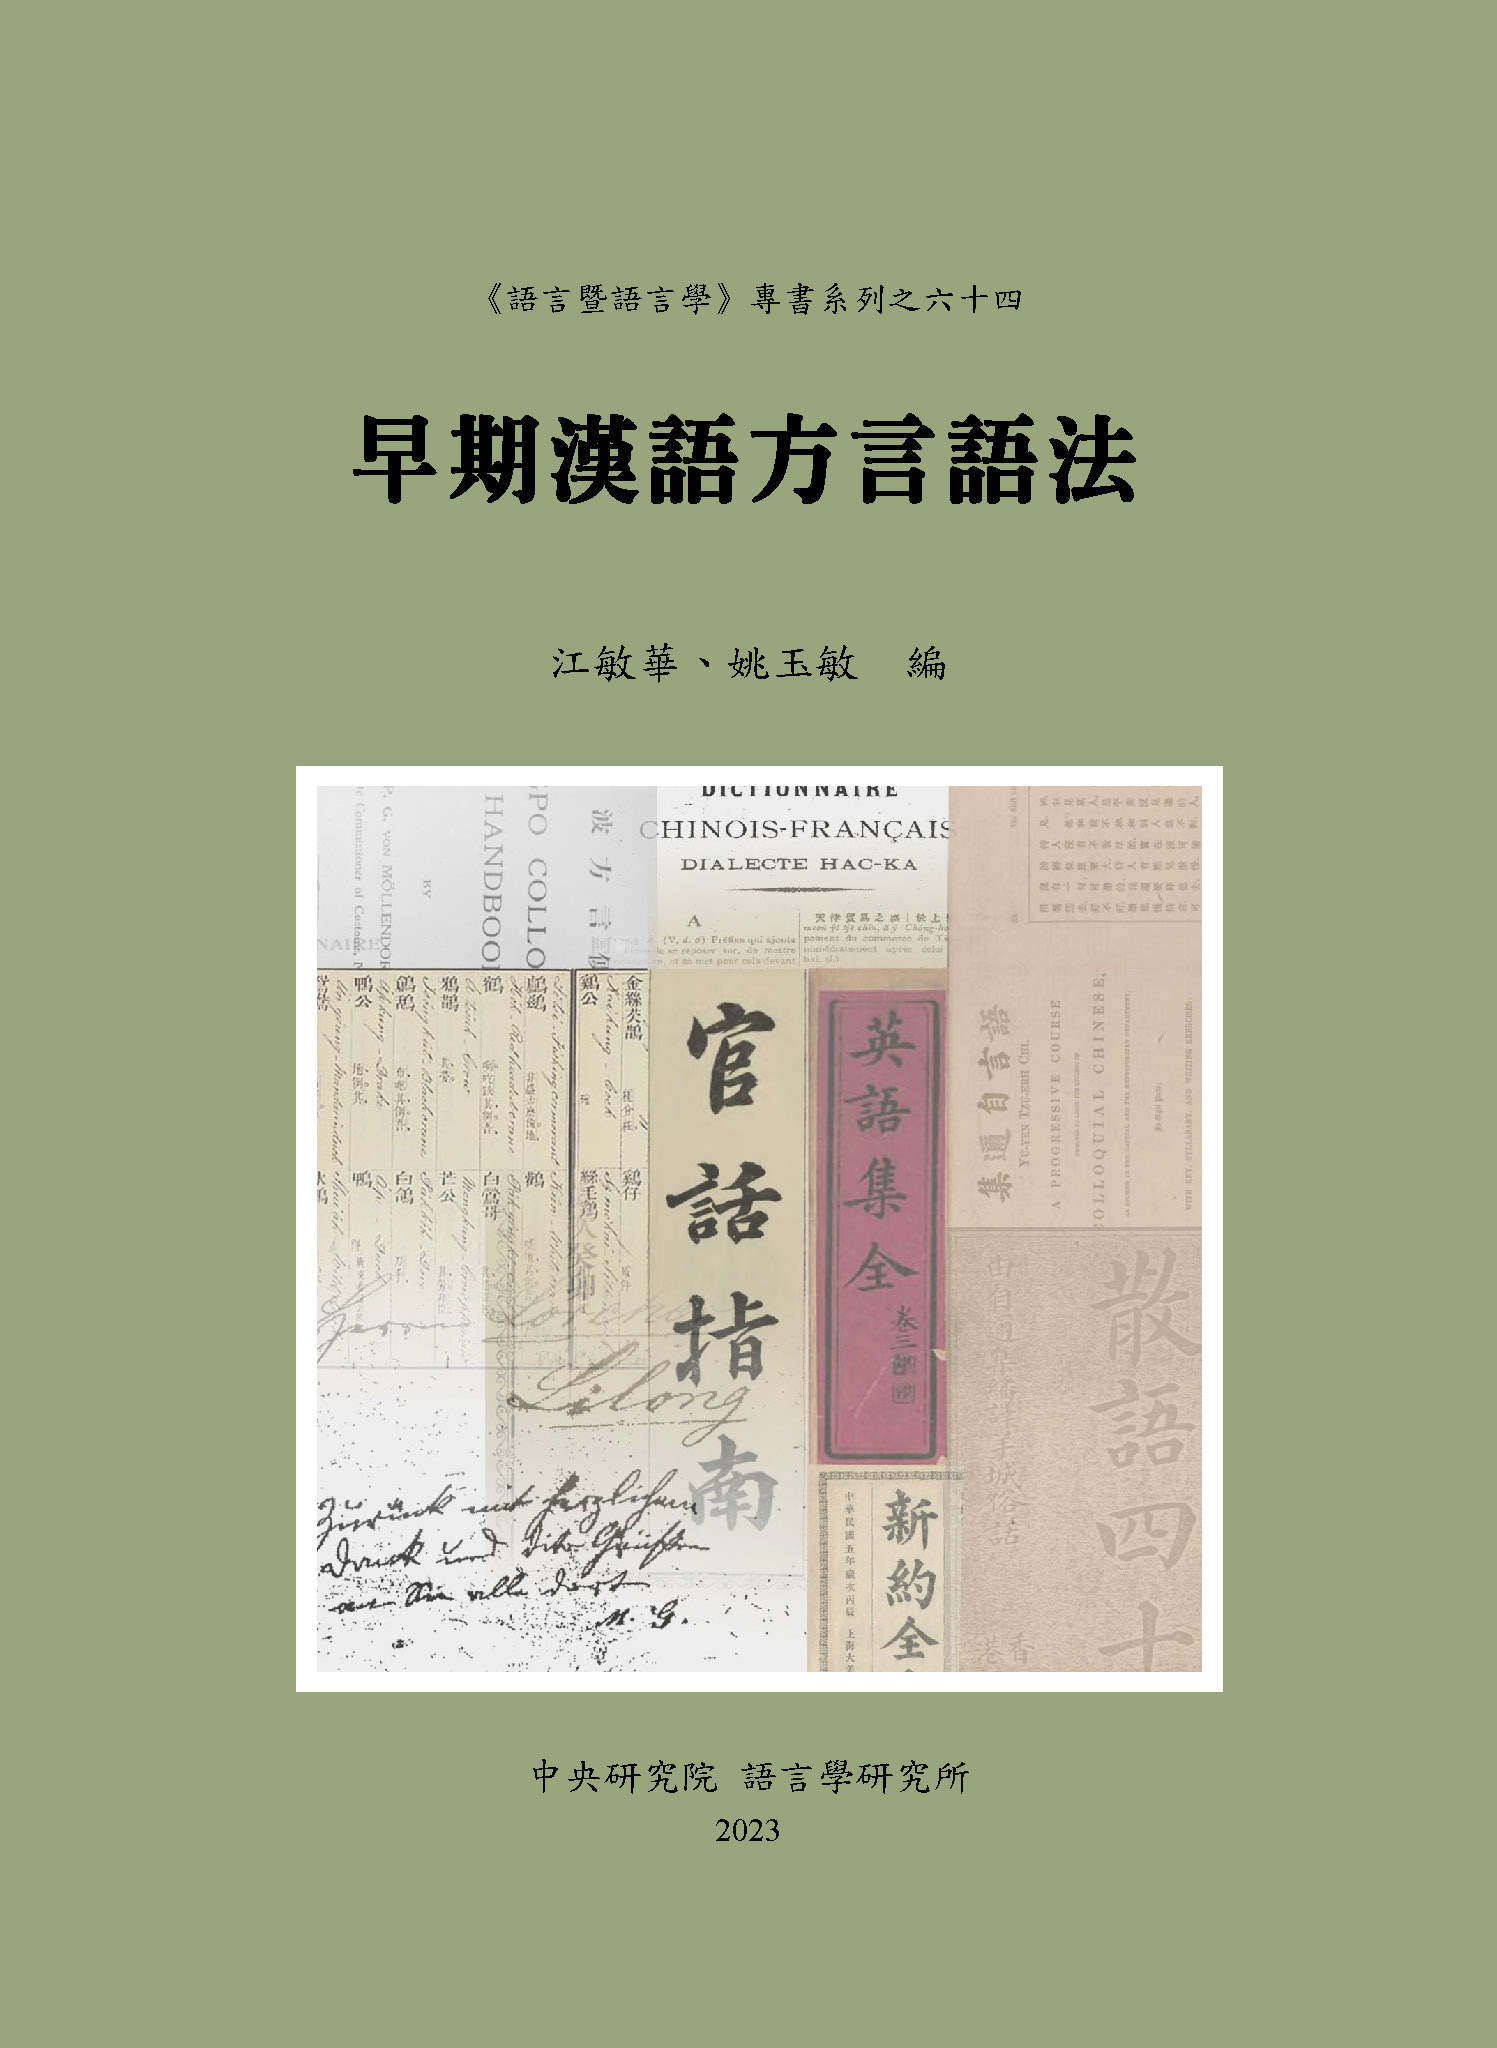 Grammatical Studies on Early Chinese Dialects